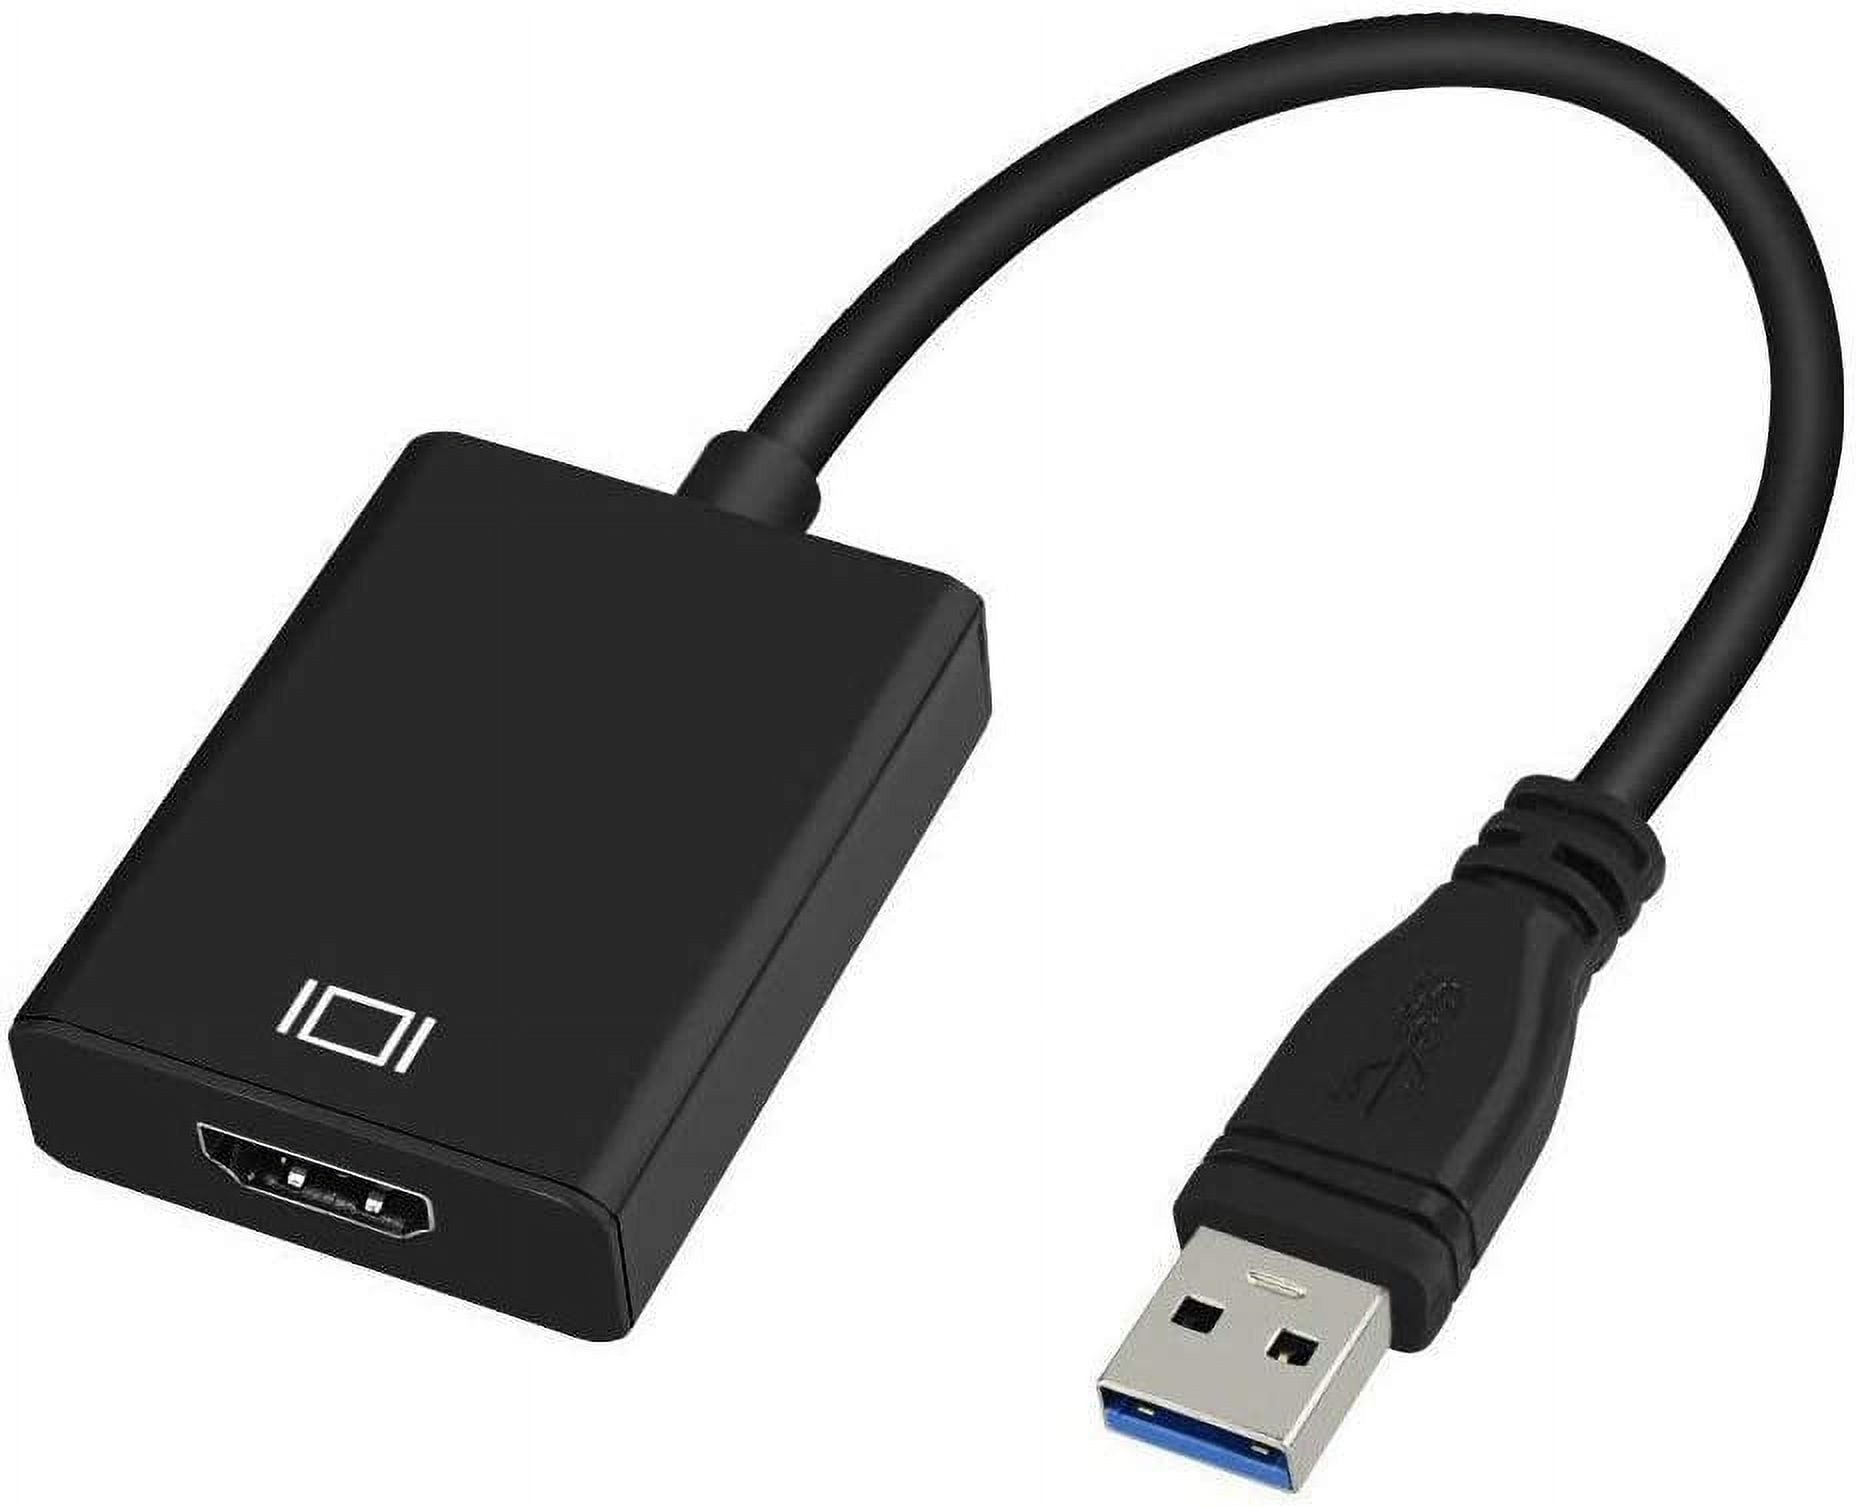 USB 3.0 to HDMI Adapter, USB 3.0/2.0 to HDMI Converter 1080P Full HD (Male  to Female) with Audio for Laptop HDTV Projector Compatible with Windows XP  7/8/8.1/10 